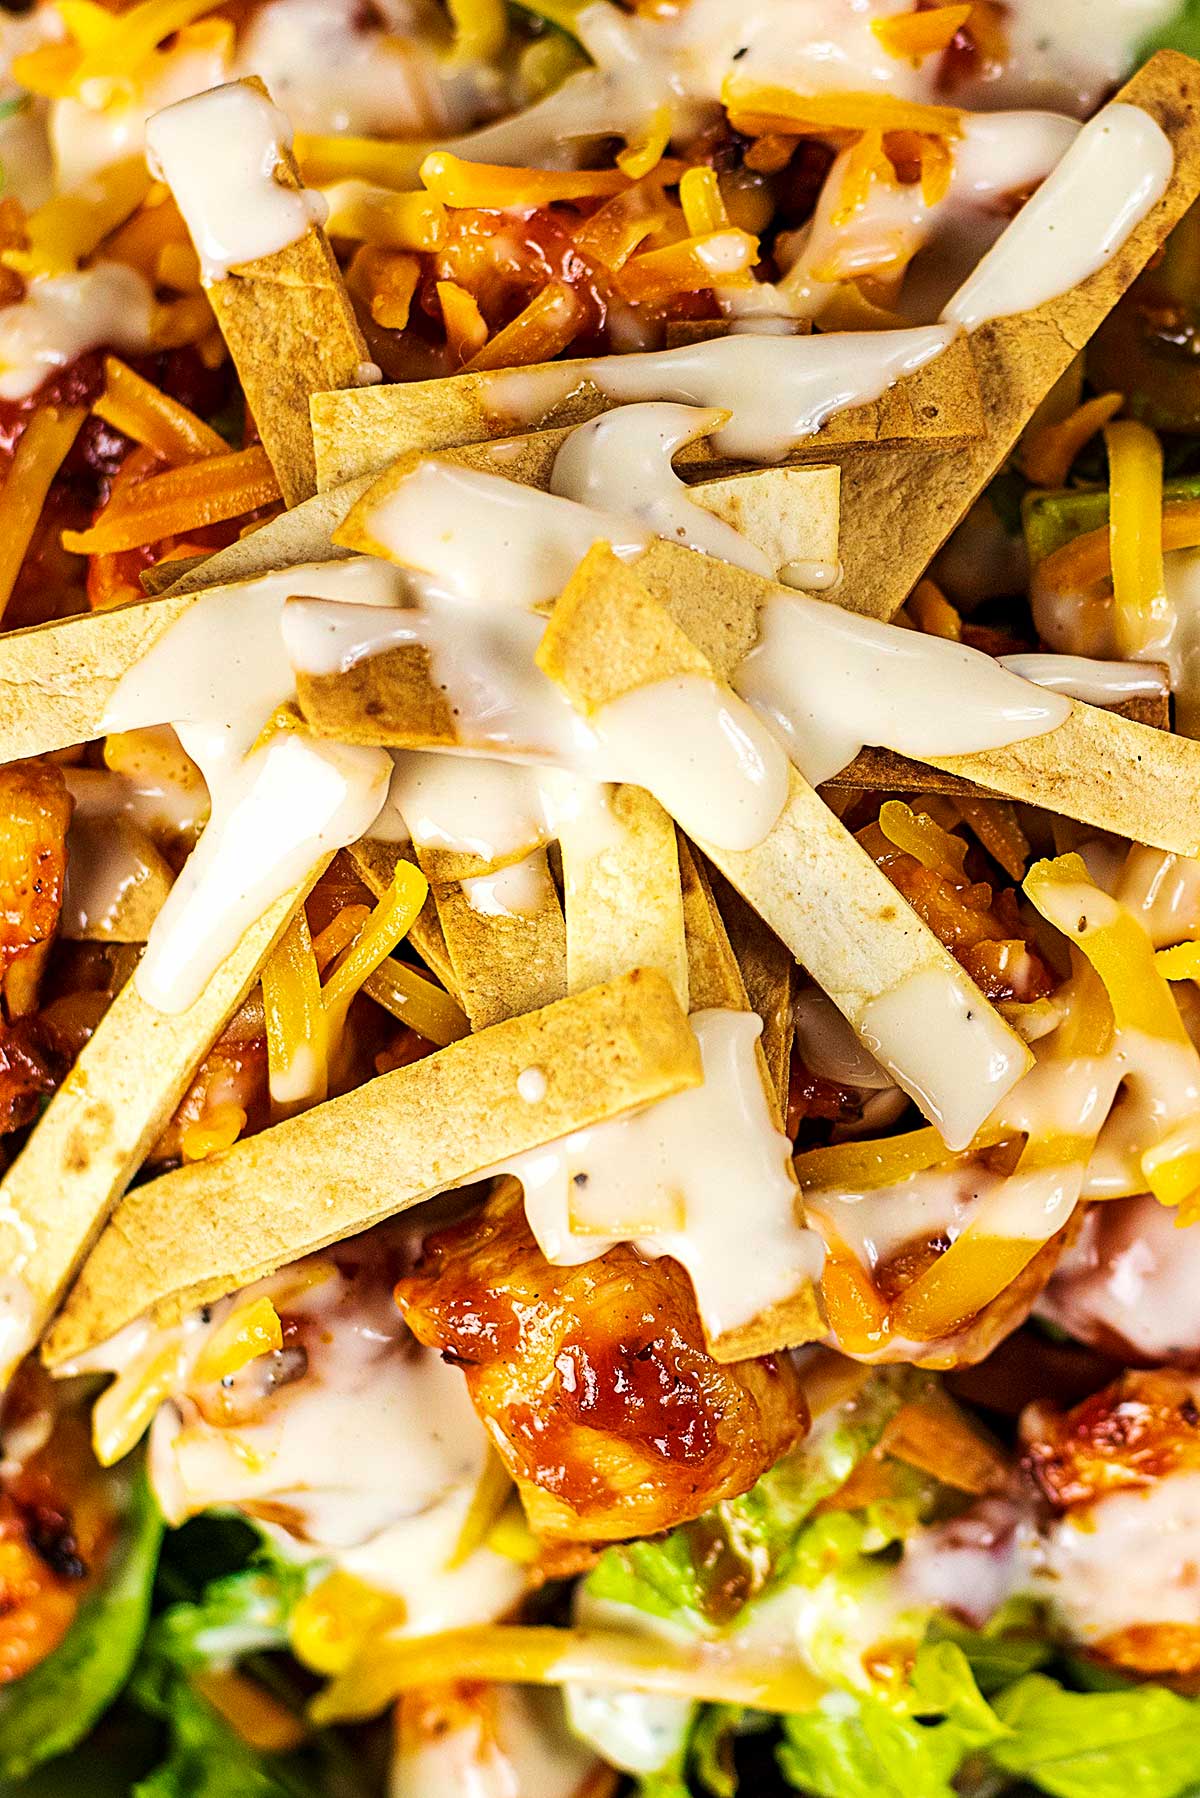 Strips of crispy tortilla on top of a salad with ranch dressing drizzled over.